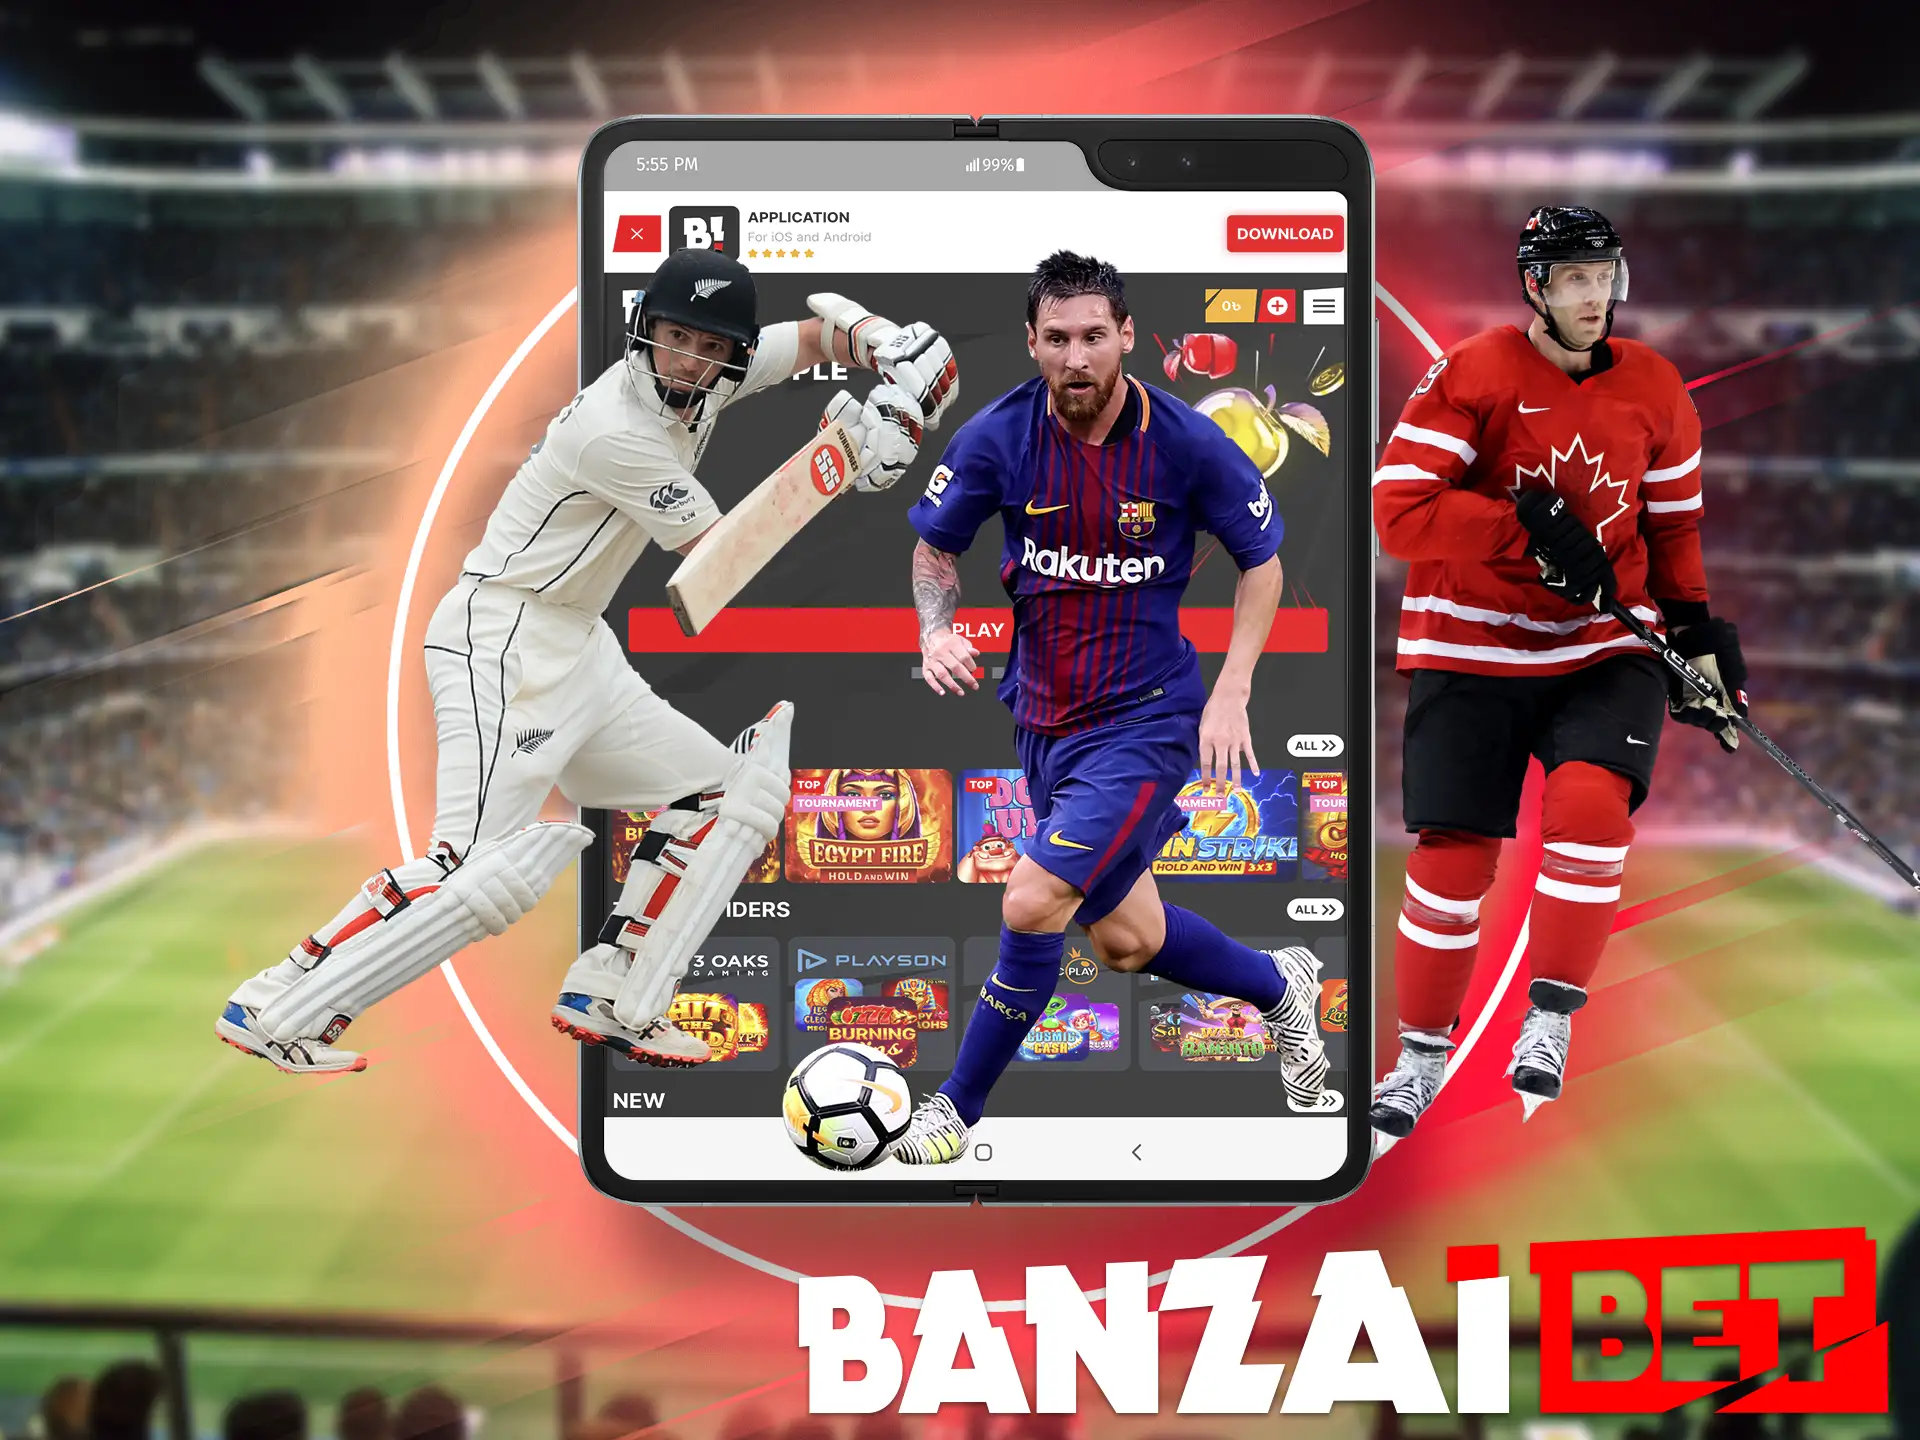 You'll find plenty of interesting markets and keep up to date with the latest sporting events at Banzai Bet.